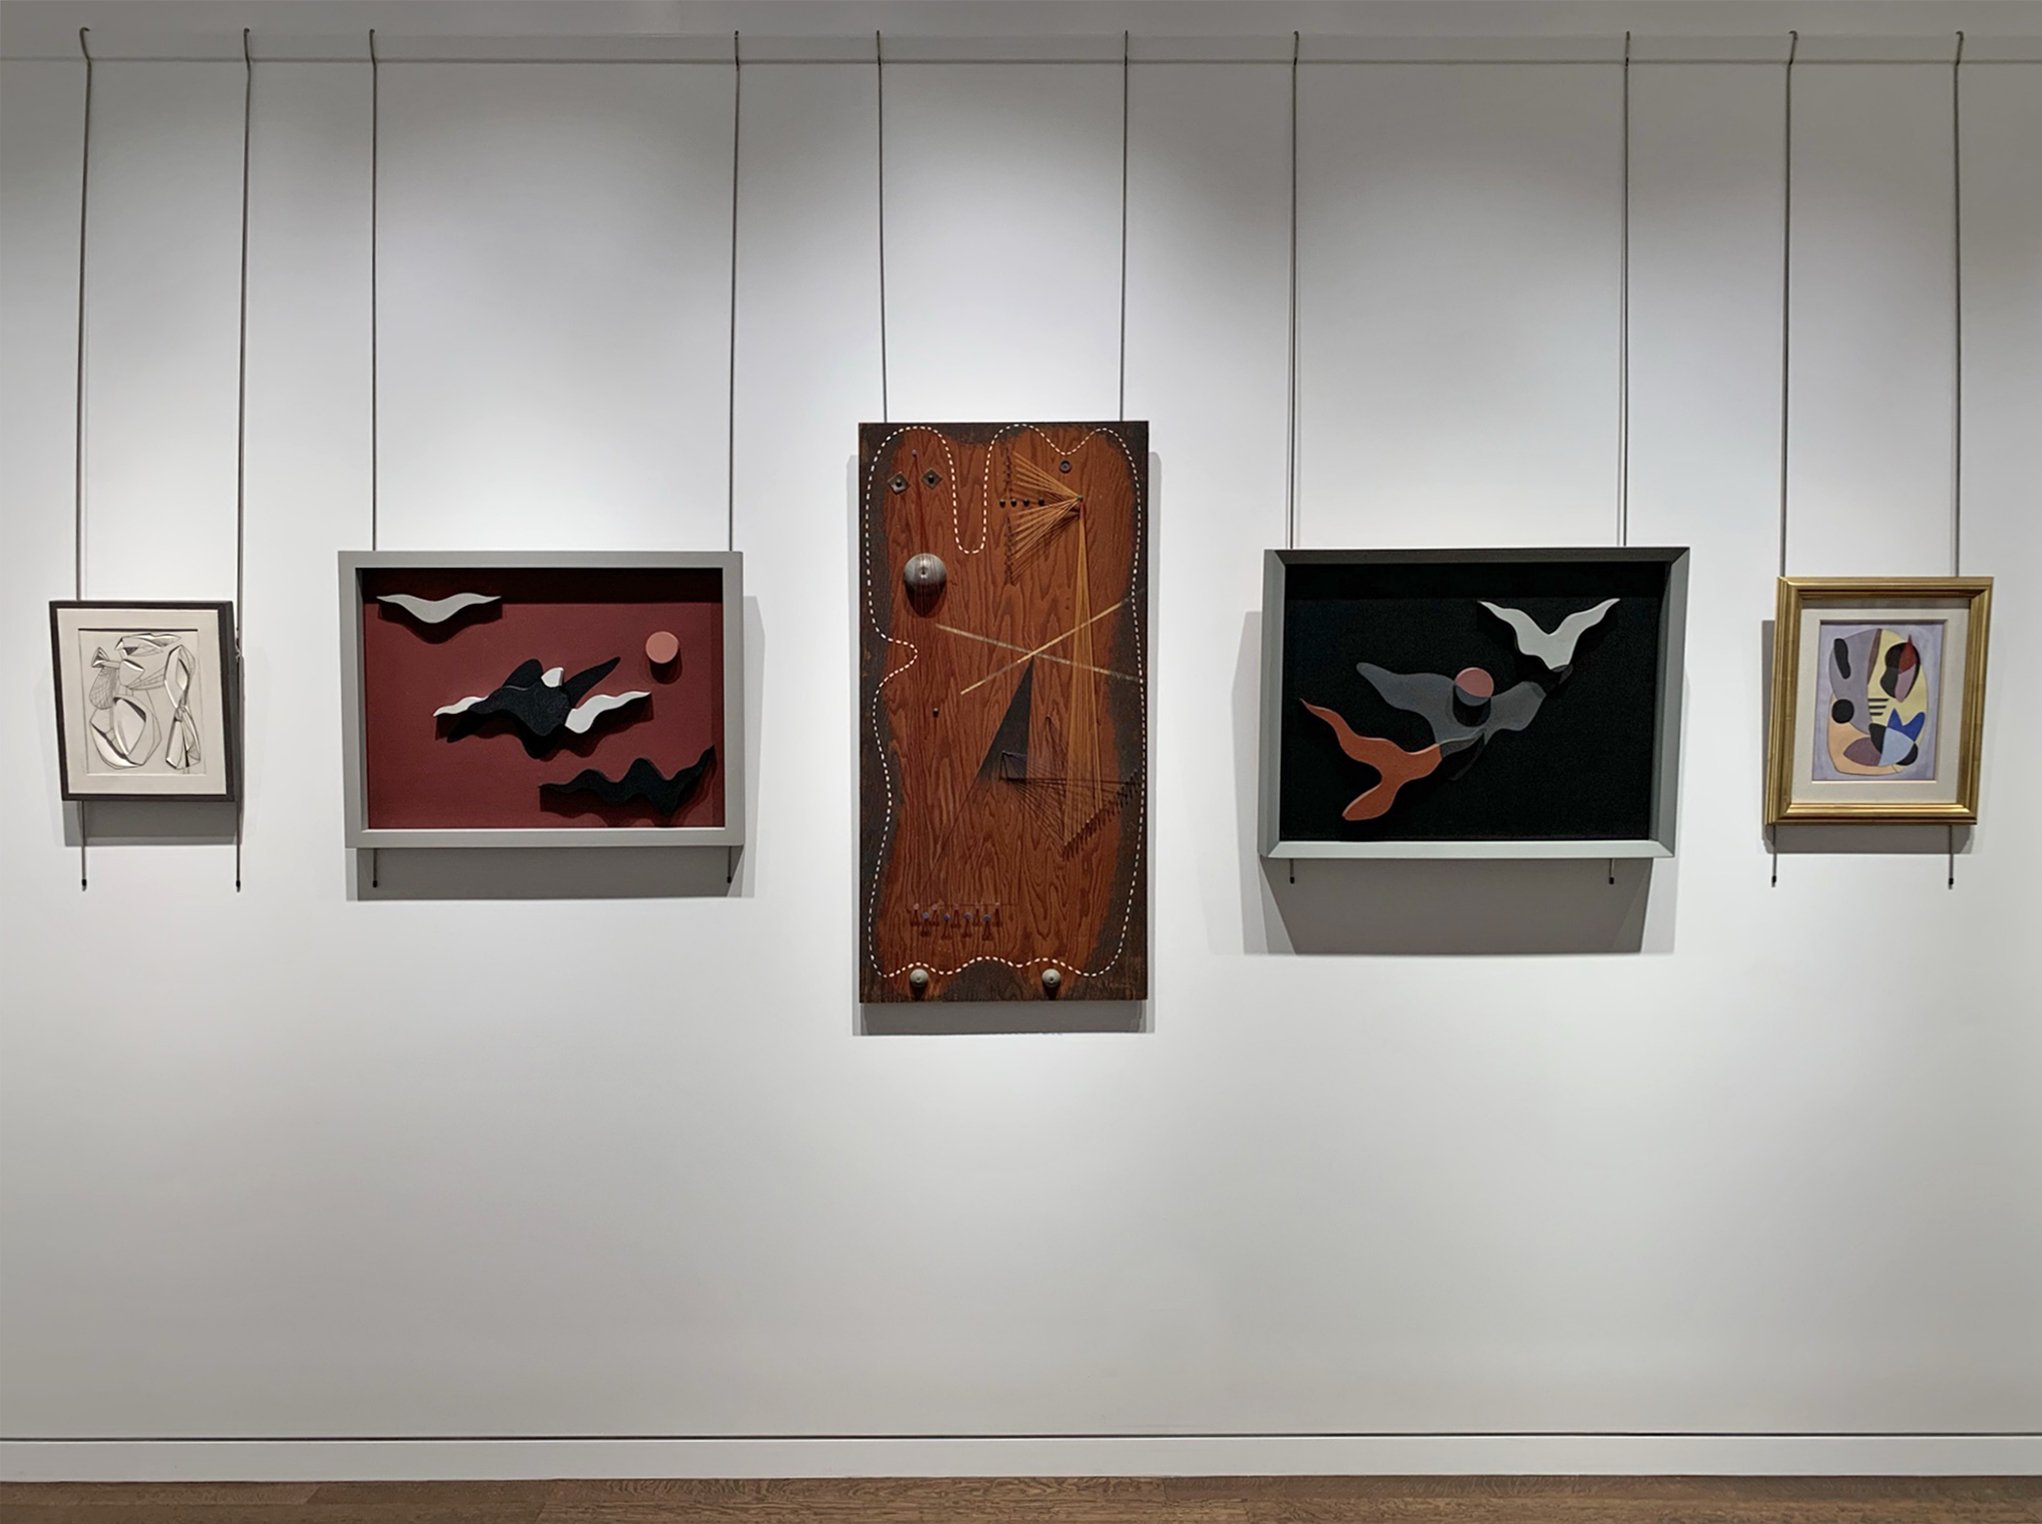  THE BIRTH OF AMERICAN ABSTRACTION: THE 1936 CONCRETIONISTS EXHIBITION May 13- July 30, 2021 